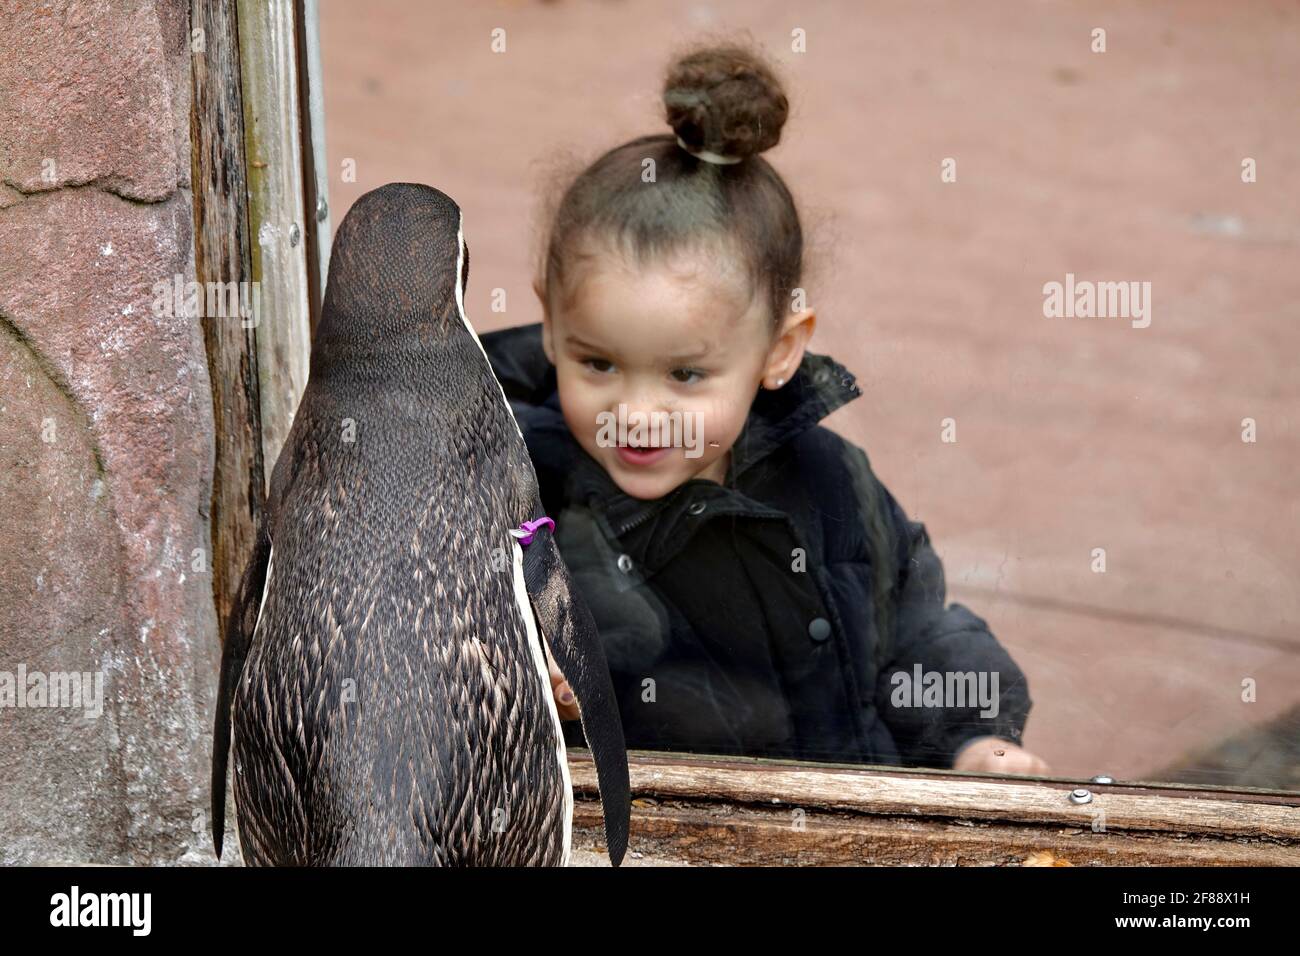 London, UK. 12th April 2021. Milah presses her face to the glass of the penguin enclosure and smiles at the penguins at ZSL London Zoo on opening day following covid19 restrictions. Stock Photo